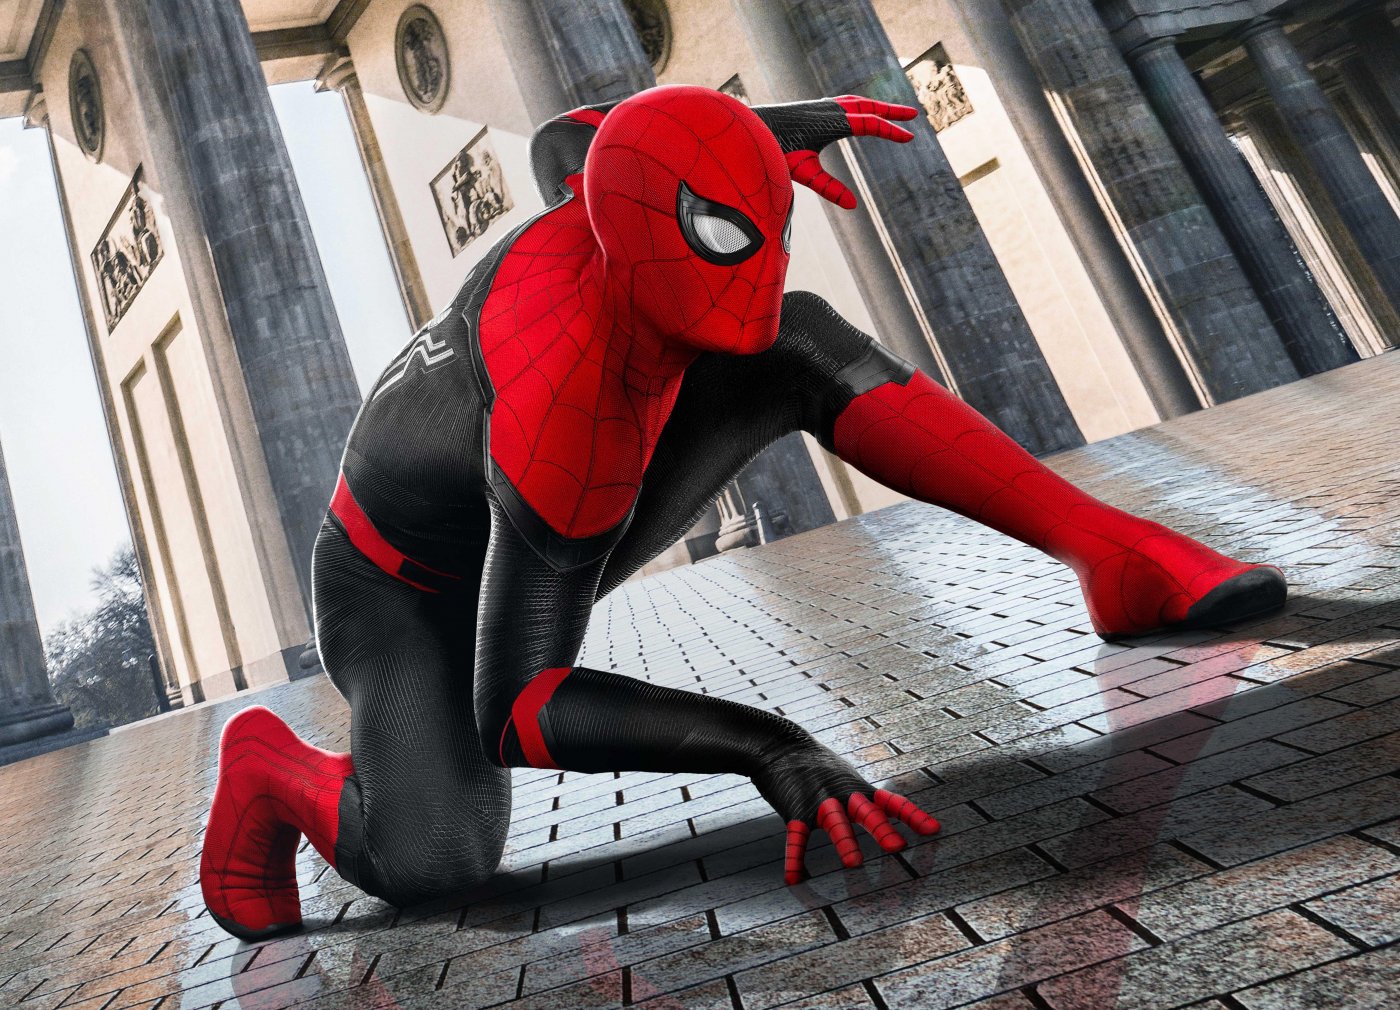 spider-man: far from home